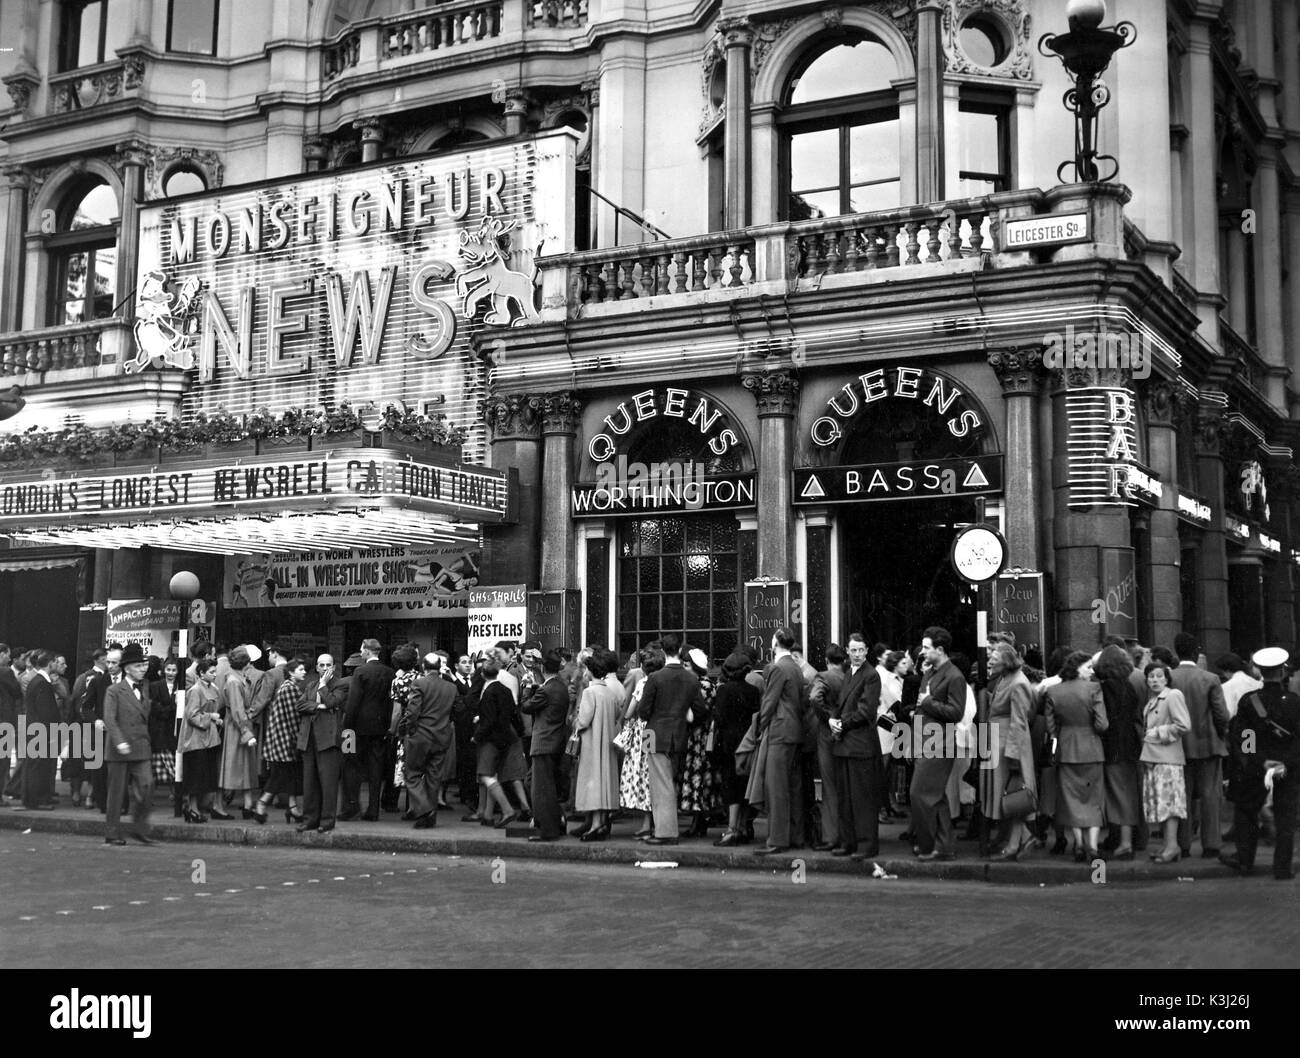 MONSEIGNEUR NEWS THEATRE, LEICESTER SQUARE, LONDON Stock Photo